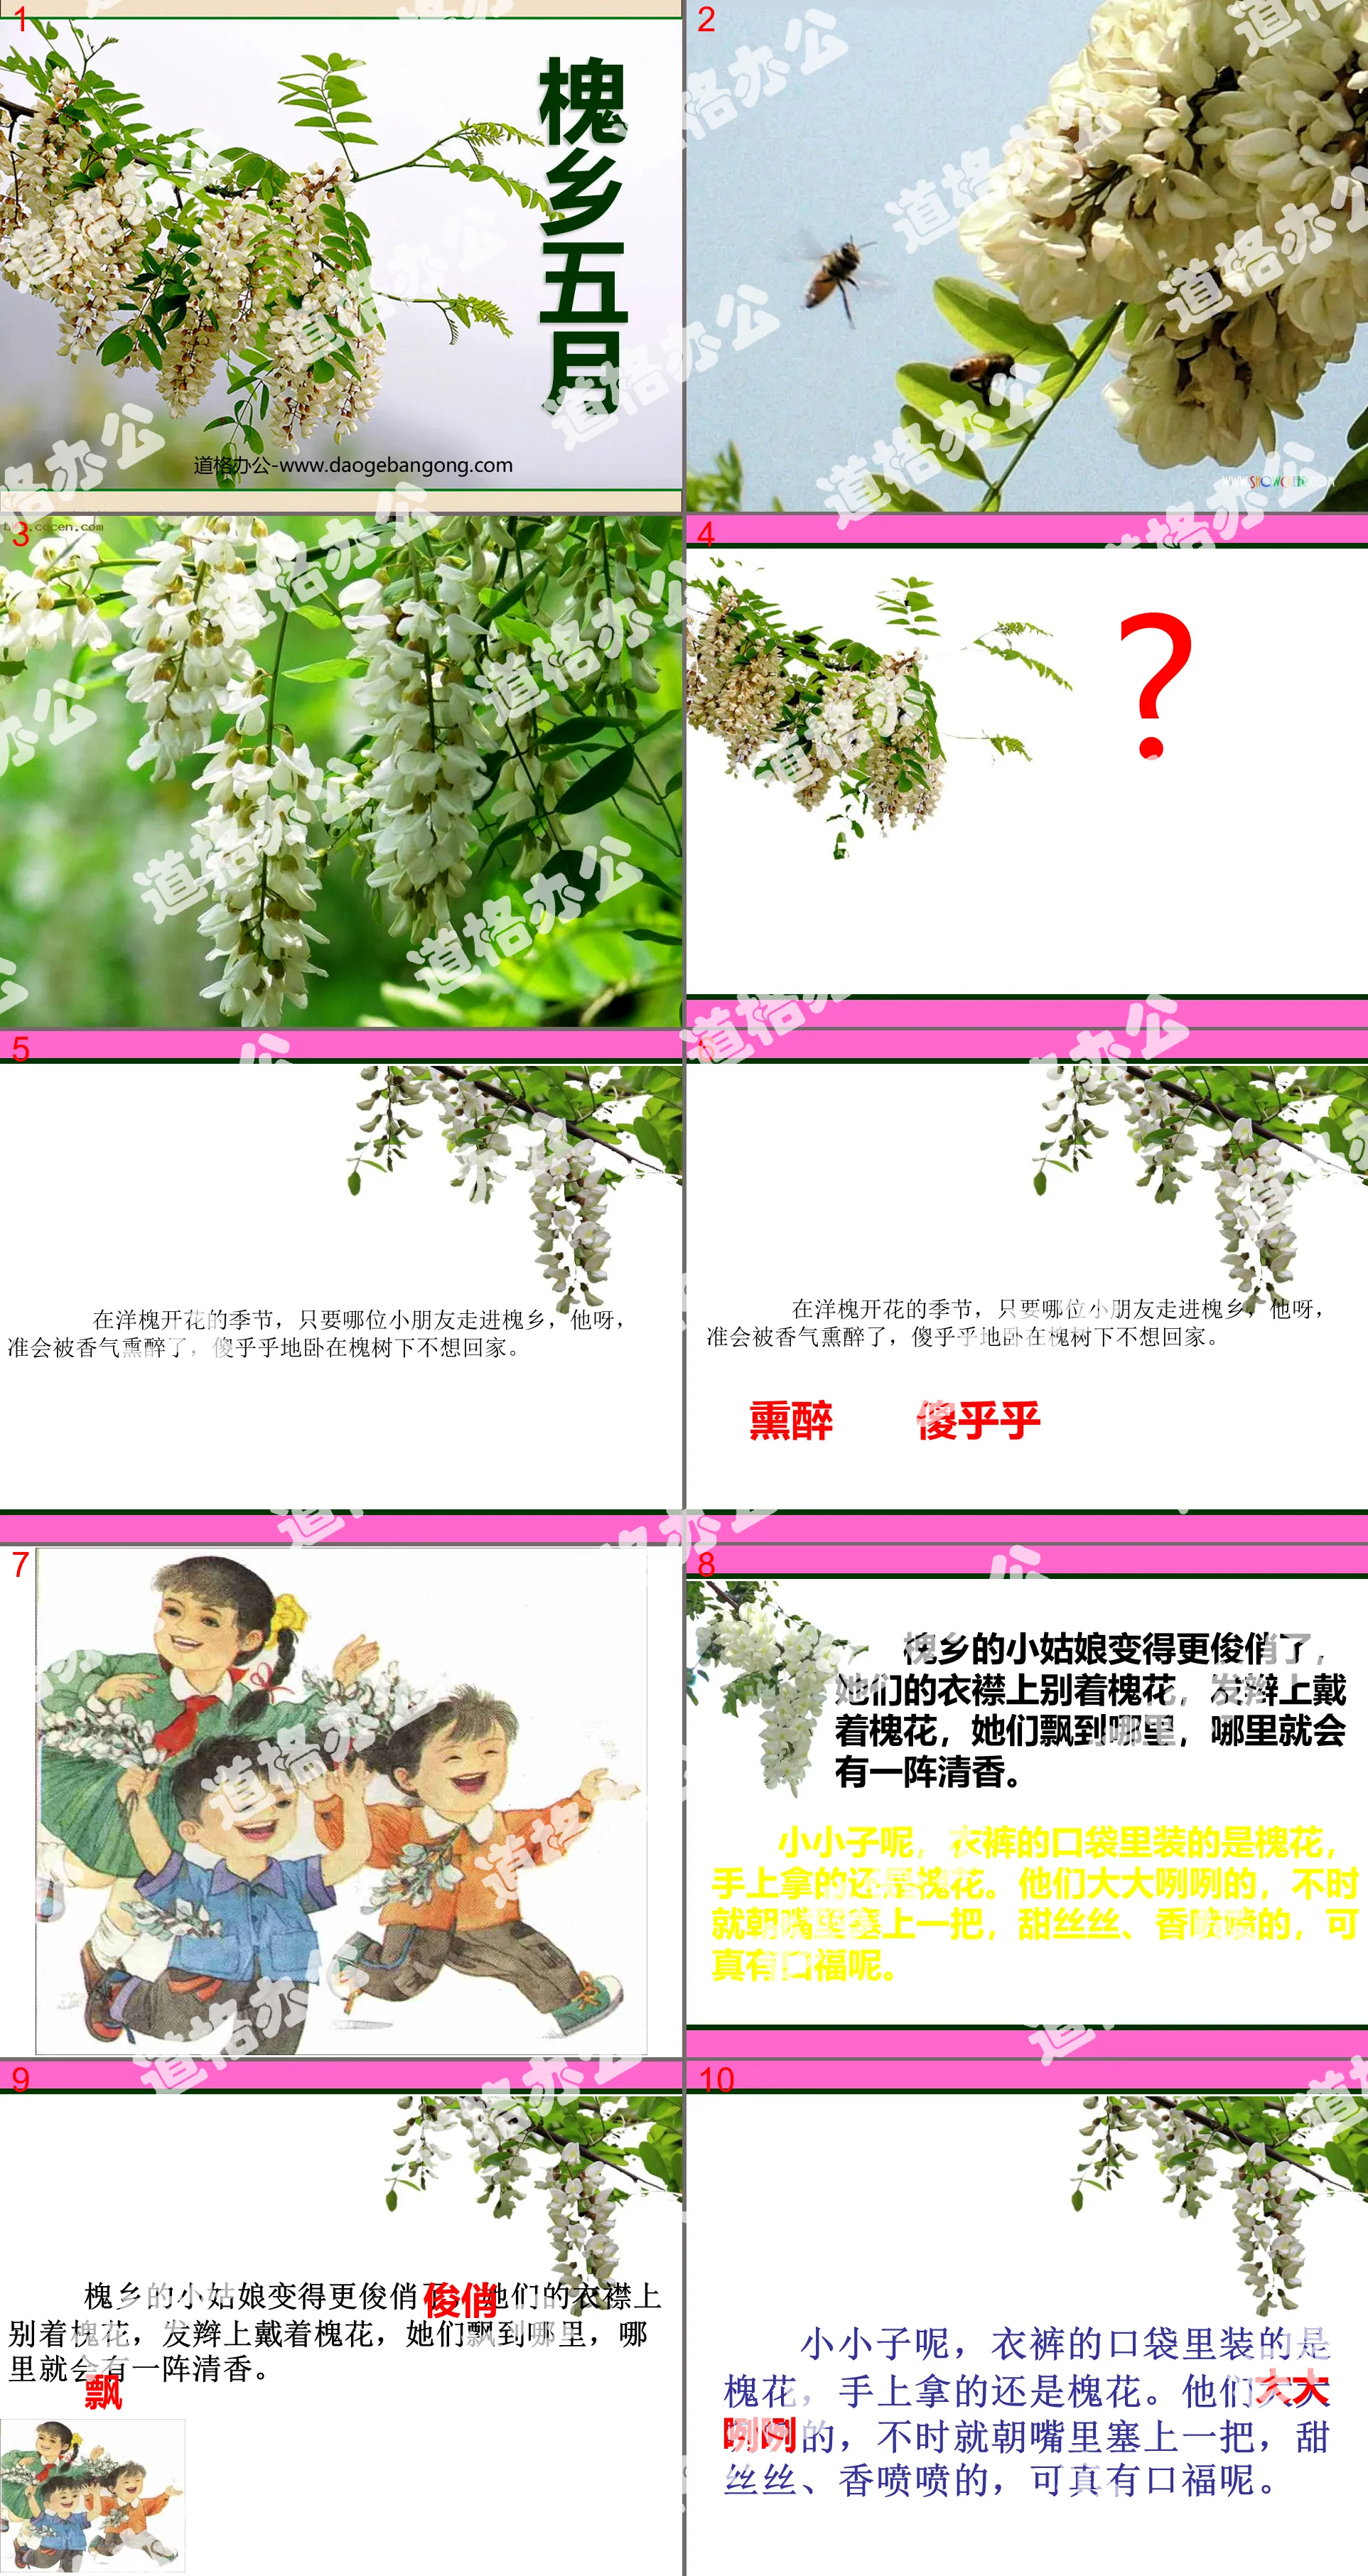 "May in Huaixiang" PPT courseware 5